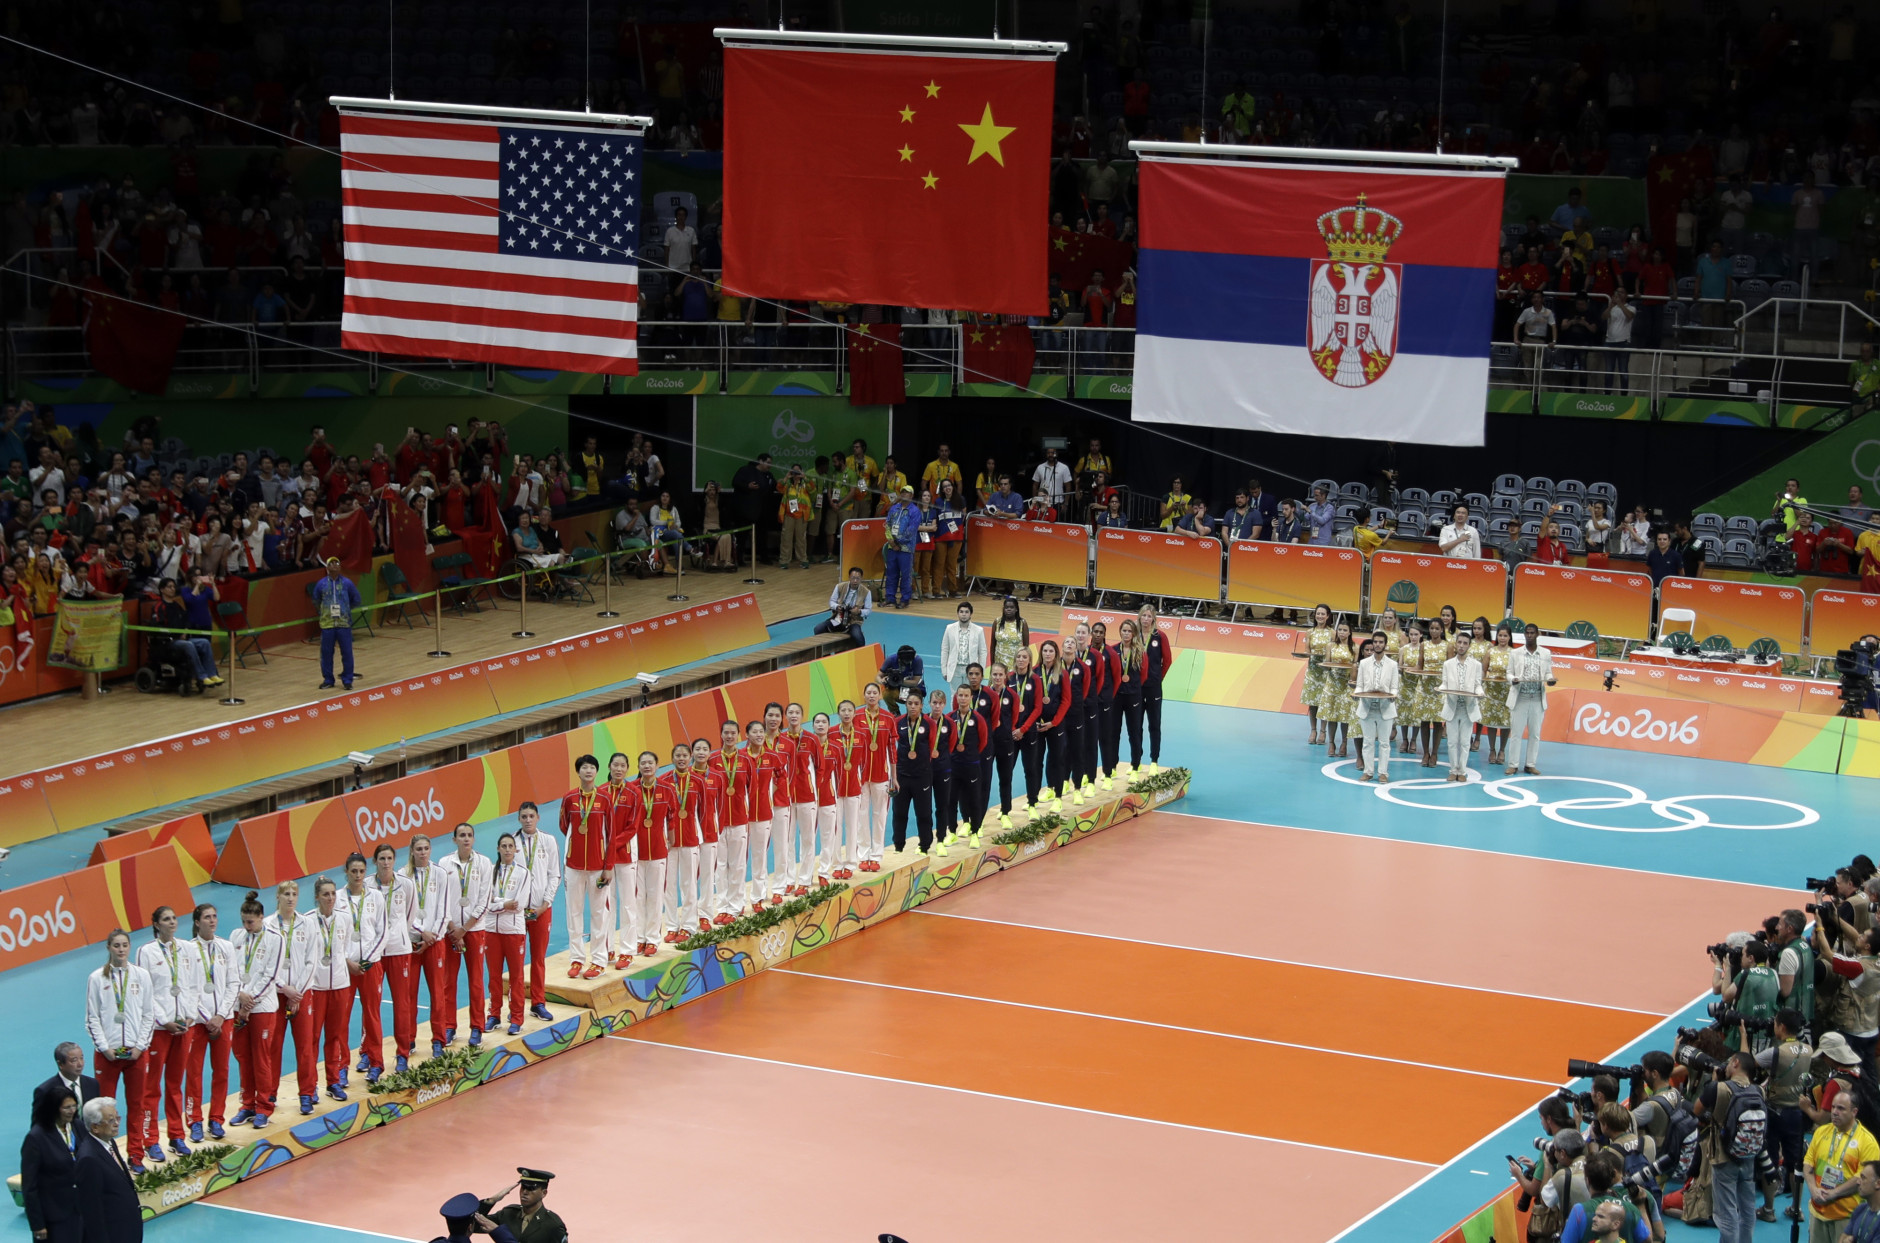 The teams of China, center, Serbia, left, and the United States watch as their flags are raised during the awards ceremony for women's volleyball at the 2016 Summer Olympics in Rio de Janeiro, Brazil, Saturday, Aug. 20, 2016. China was awarded gold while Serbia was awarded silver and the United States took bronze. (AP Photo/Jeff Roberson)